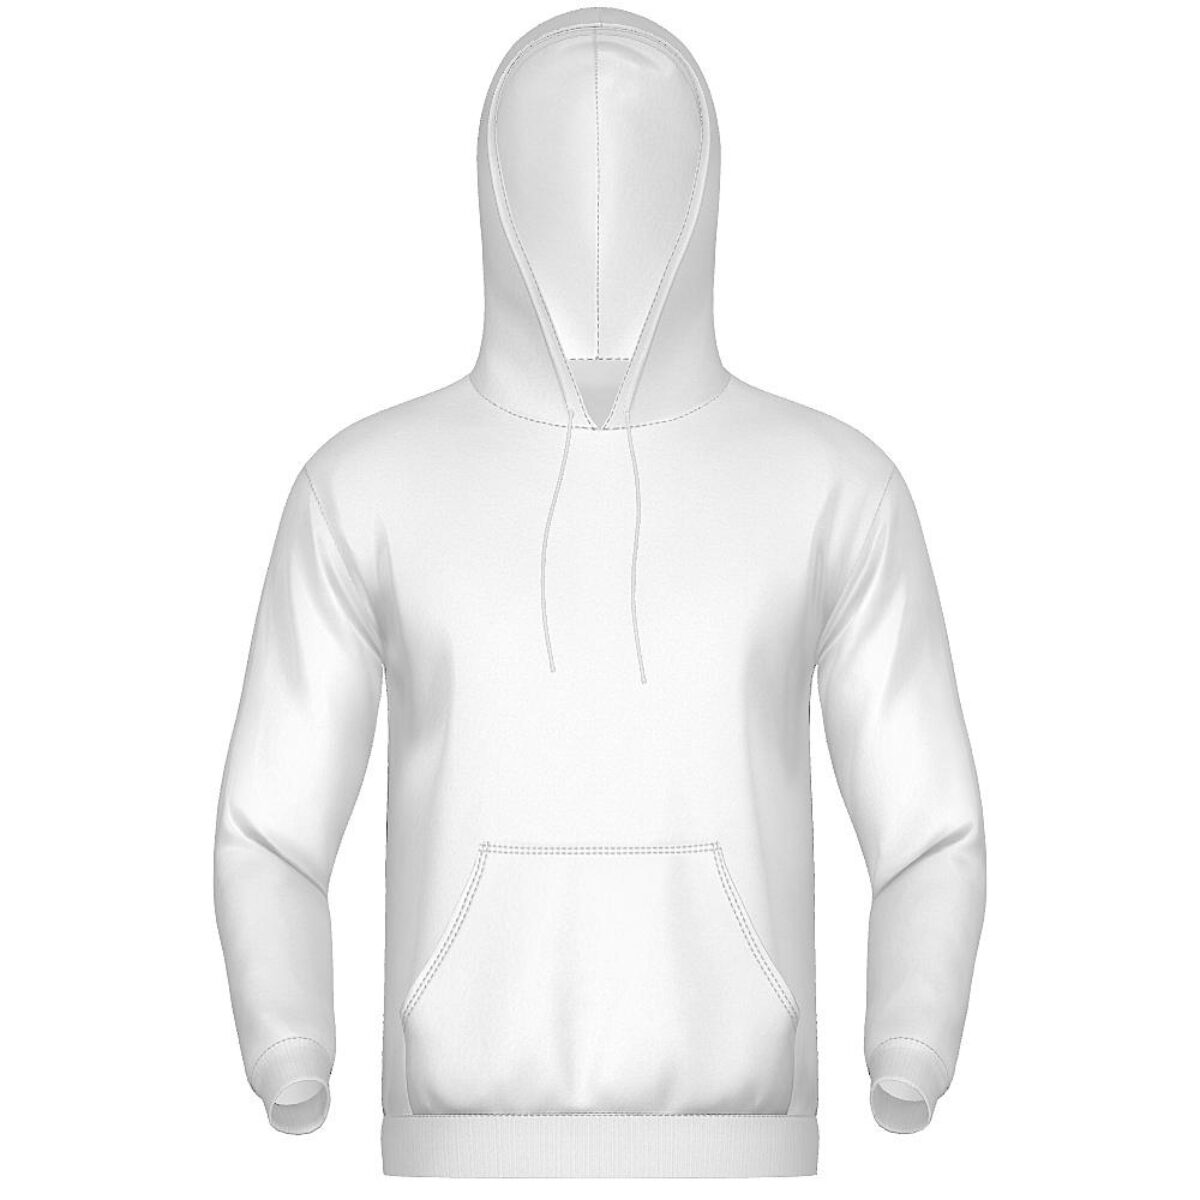 Branded, Stylish and Premium Quality Sublimation Polyester Hoodies